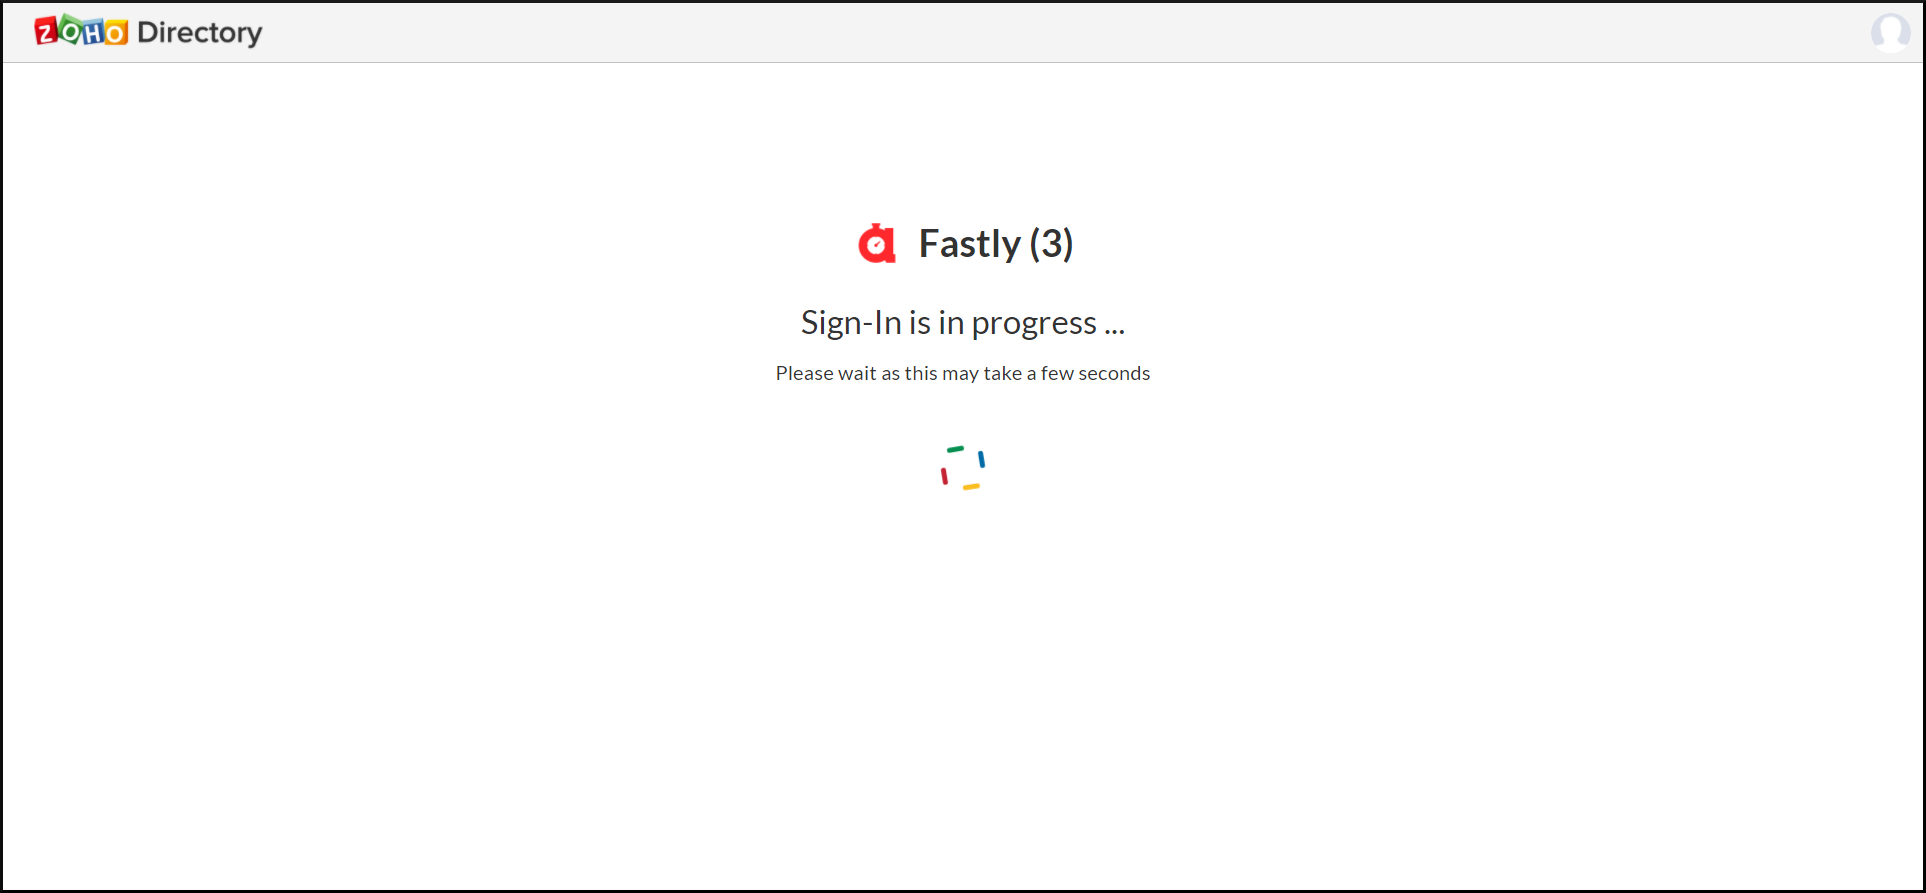 Testing Fastly SSO connection